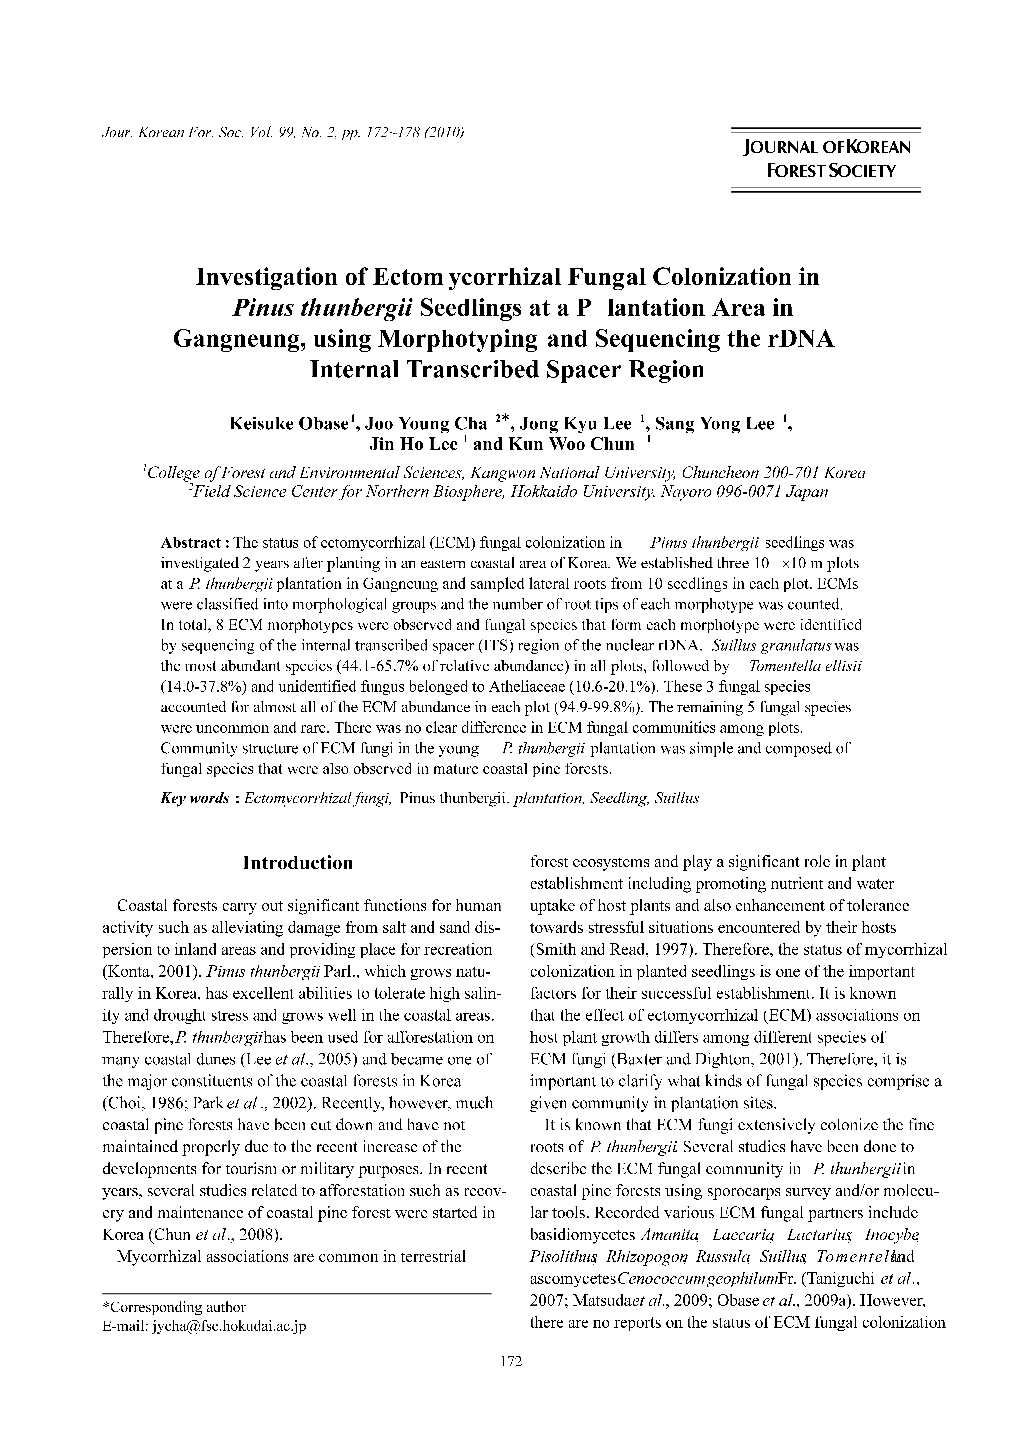 Investigation of Ectomycorrhizal Fungal Colonization in Pinus